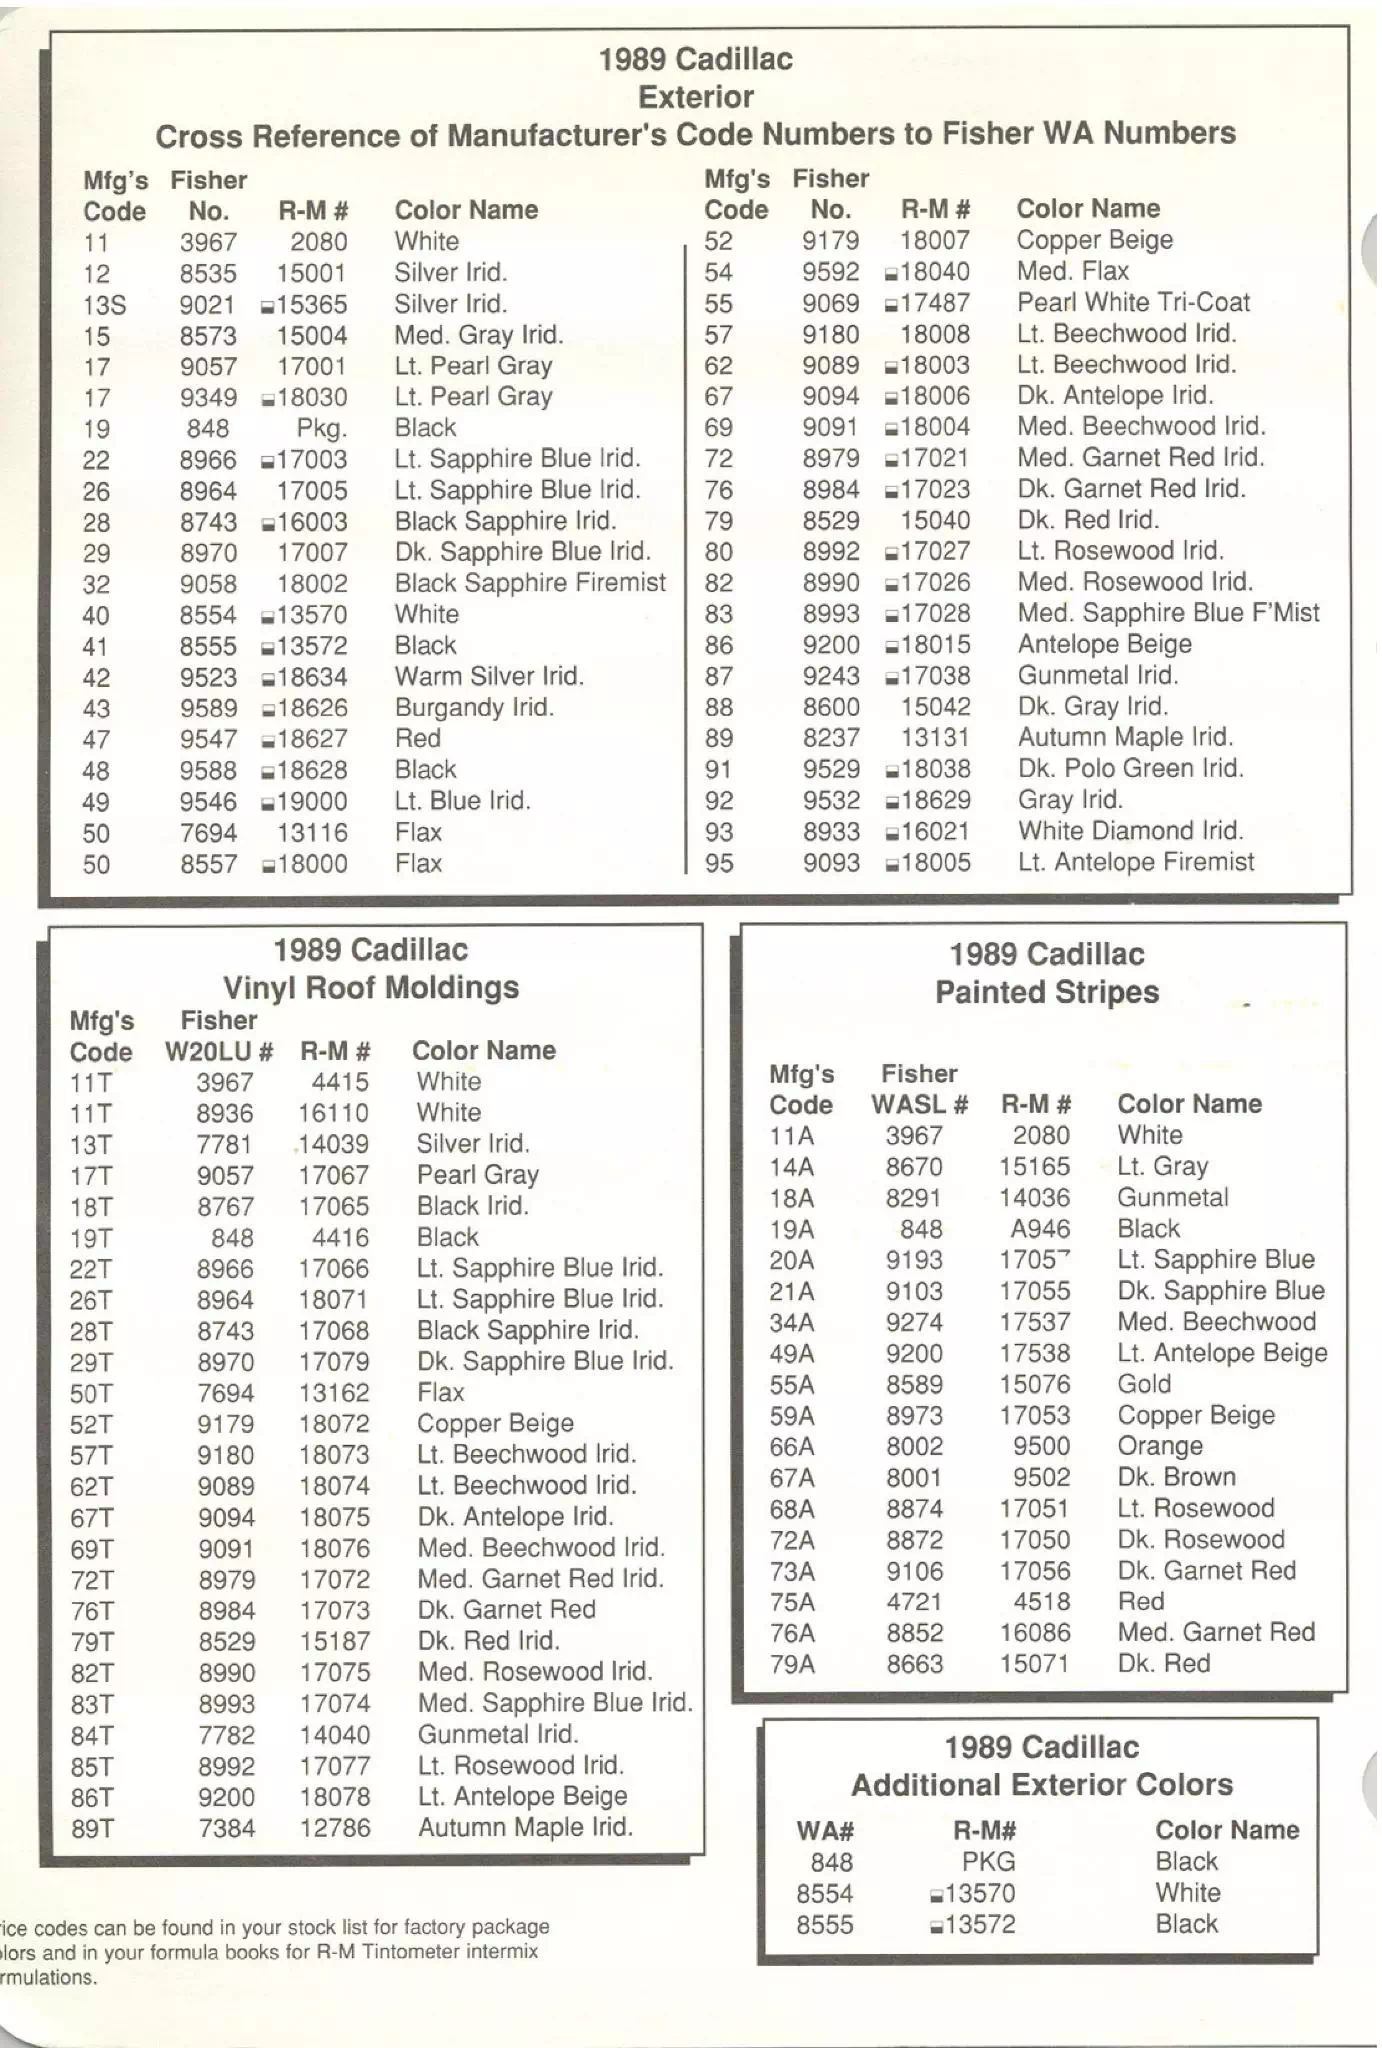 General Motors oem paint swatches, color codes and color names for 1989 vehicles.